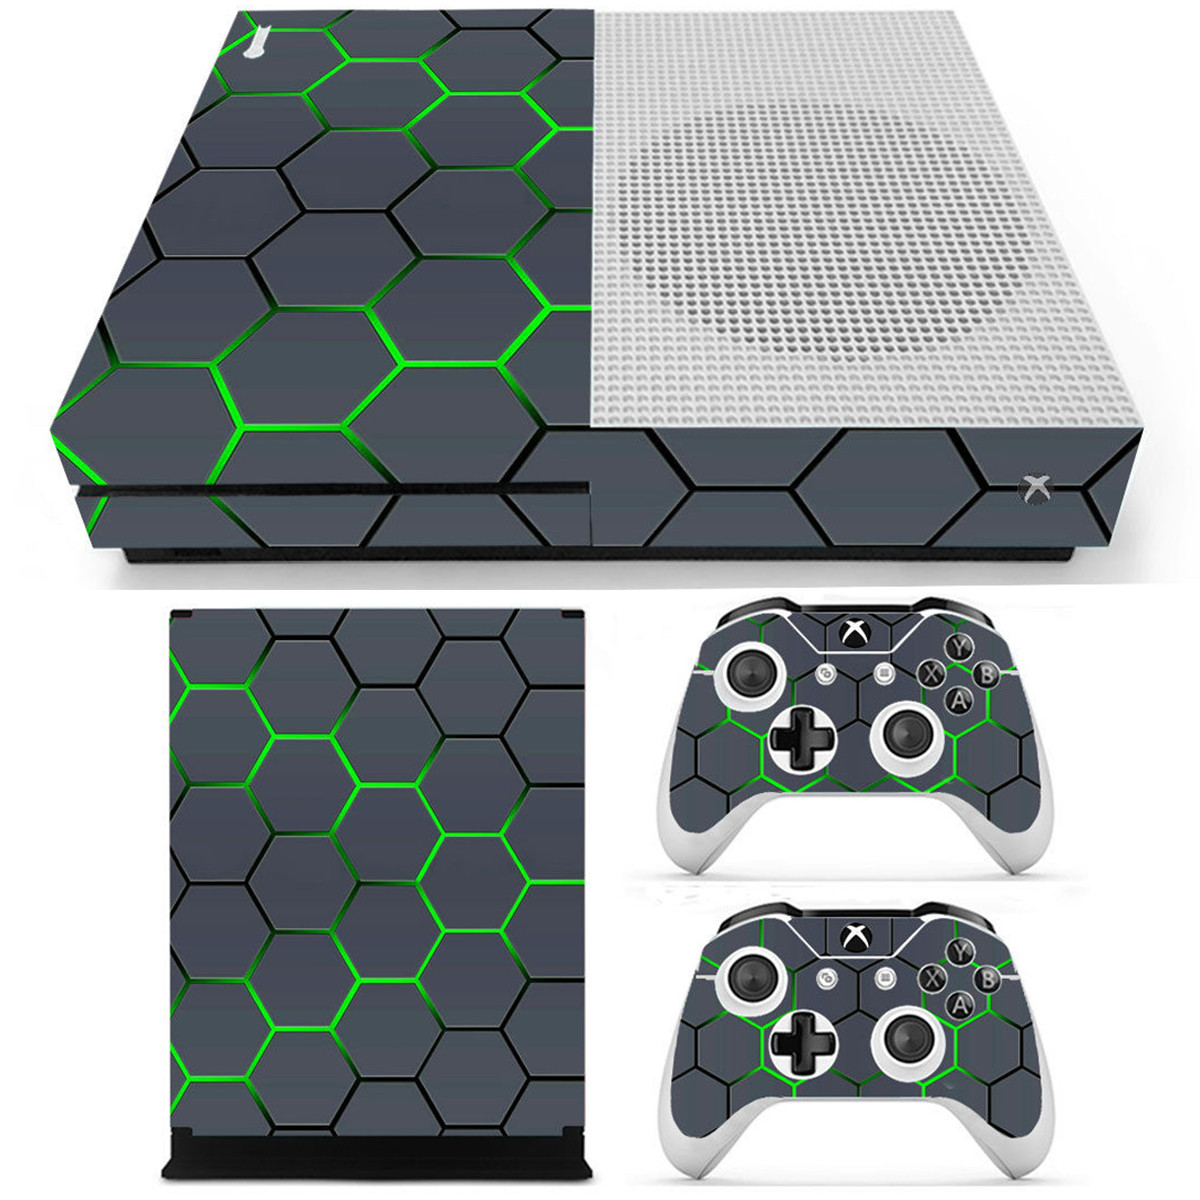 Green Grid Vinyl Decal Skin Stickers Cover for Xbox One S Game Console&2 Controllers 17